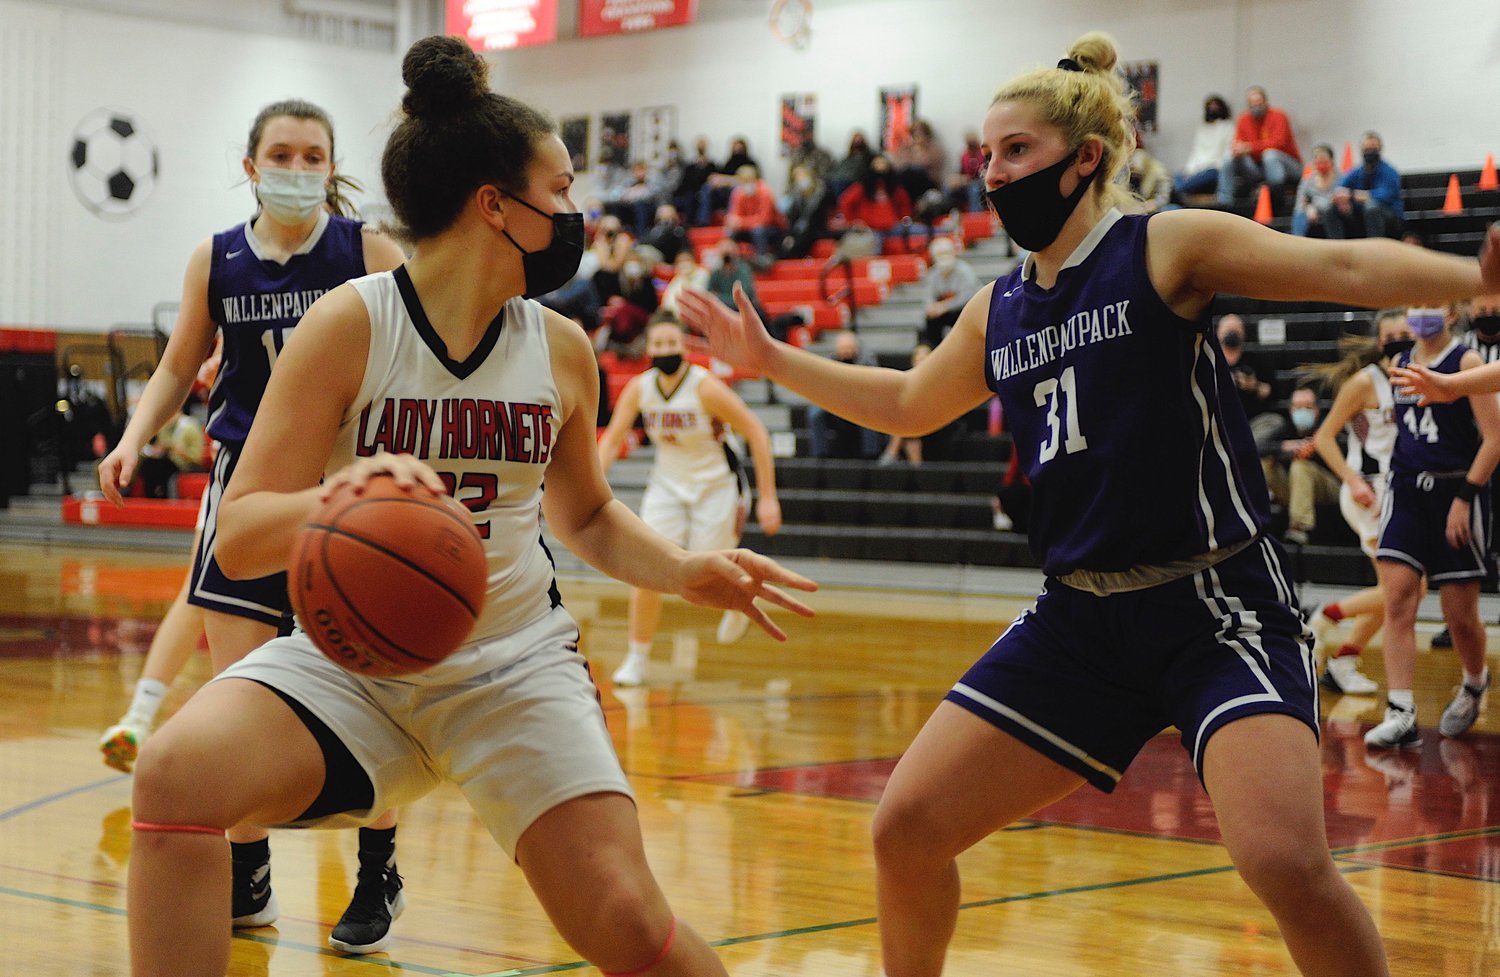 On the attack. Honesdale’s Mia Land goes up against Wallenpaupack’s Aviona Rosenthal.